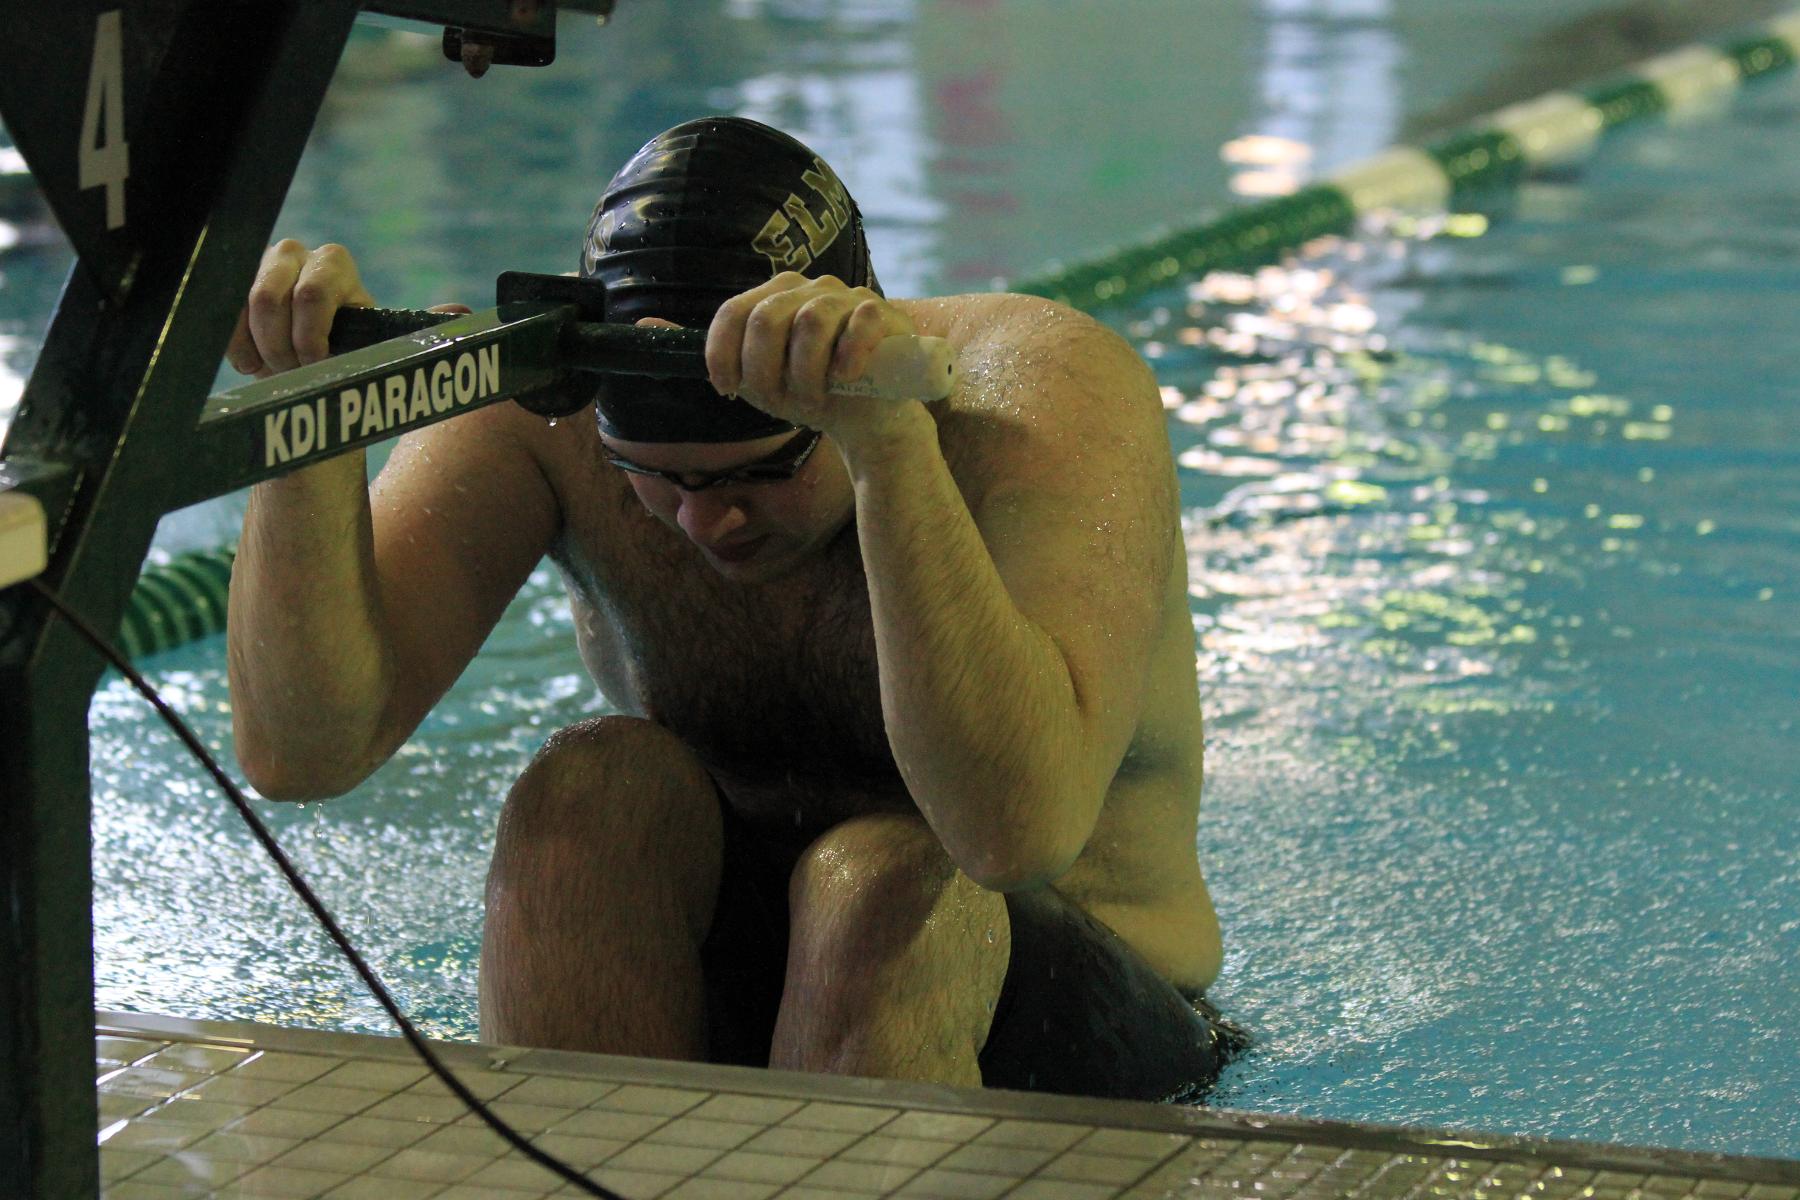 Swimming Sets Personal Records In Season Opener At Simmons